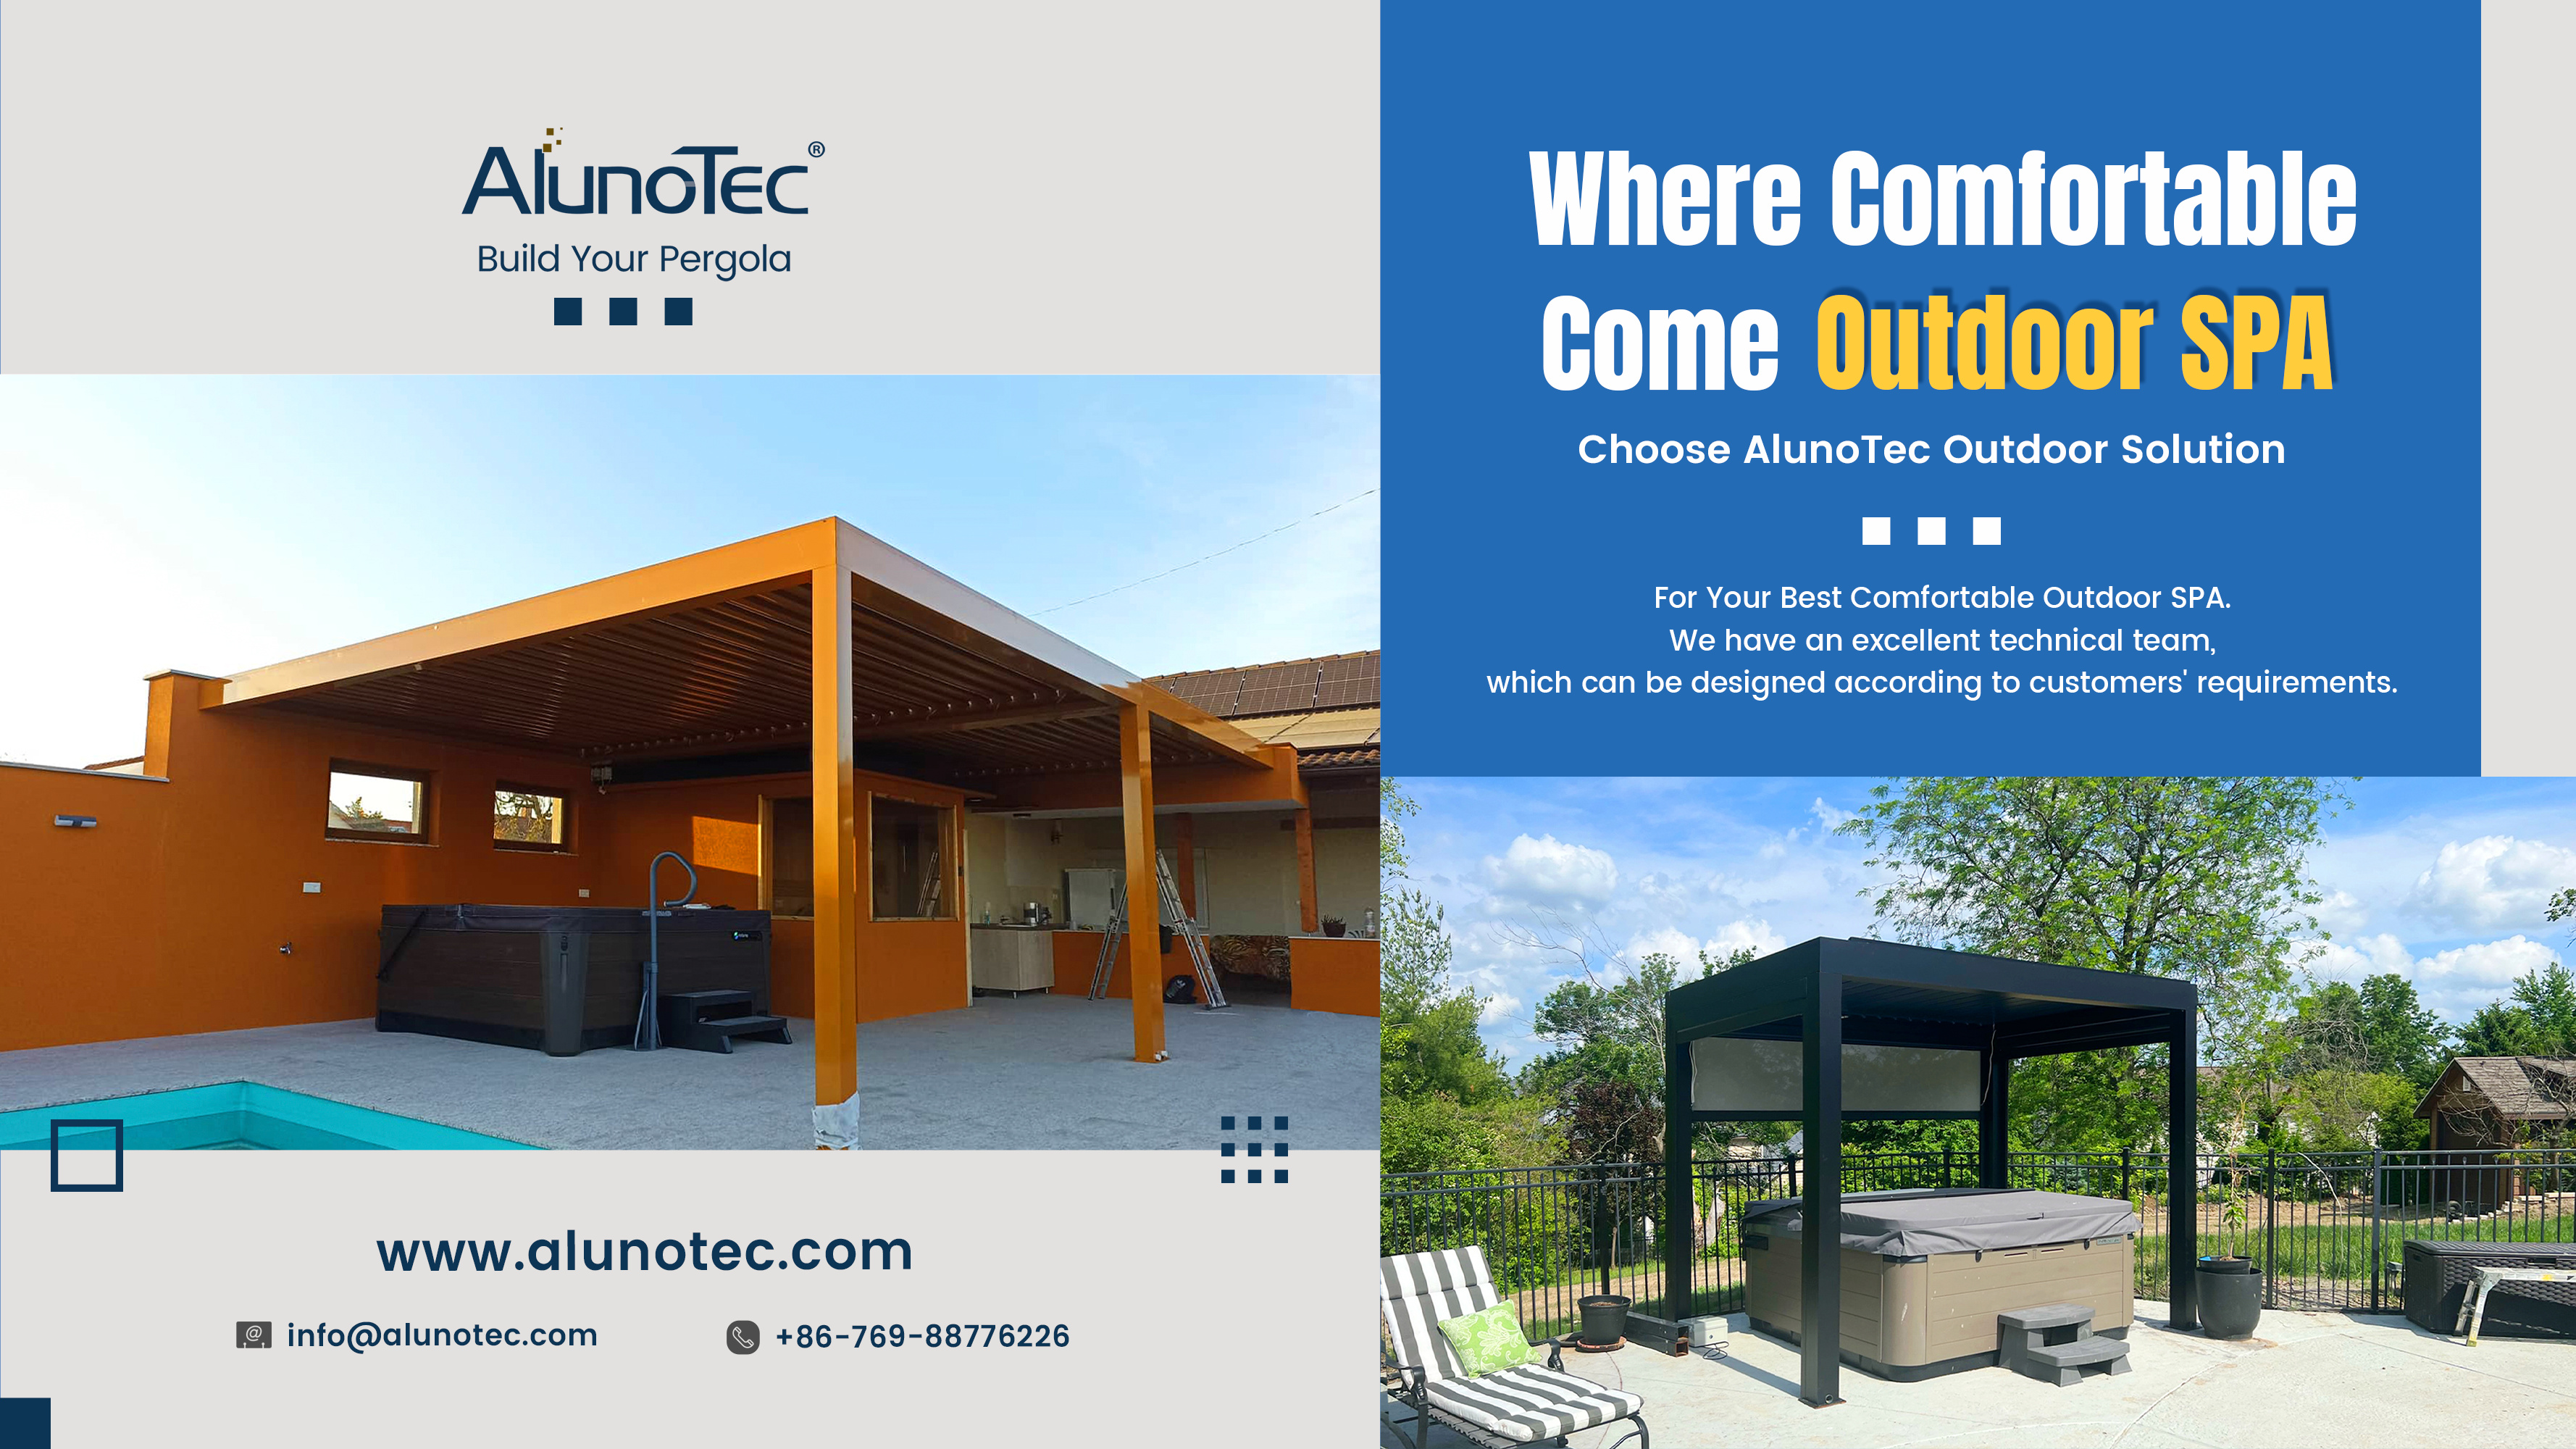 Where Comfortable, Come Outdoor SPA. Choose AlunoTec Outdoor Solution for Your Best Comfortable Outdoor SPA.